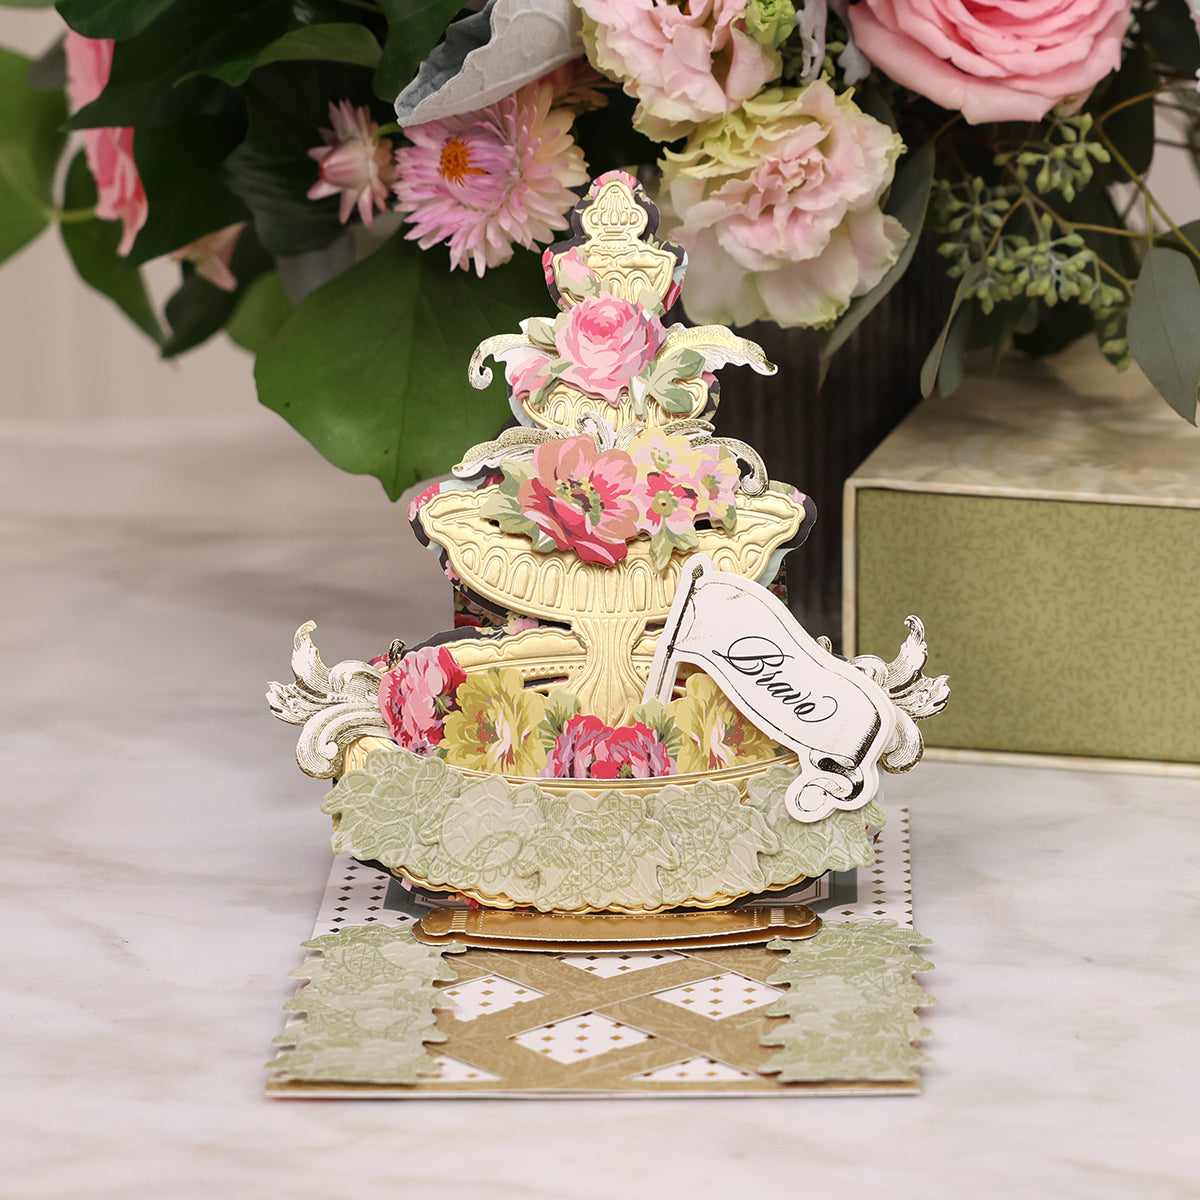 A beautiful Garden Fountain Finishing School Class card adorned with delicate flowers, made by Anna Griffin.